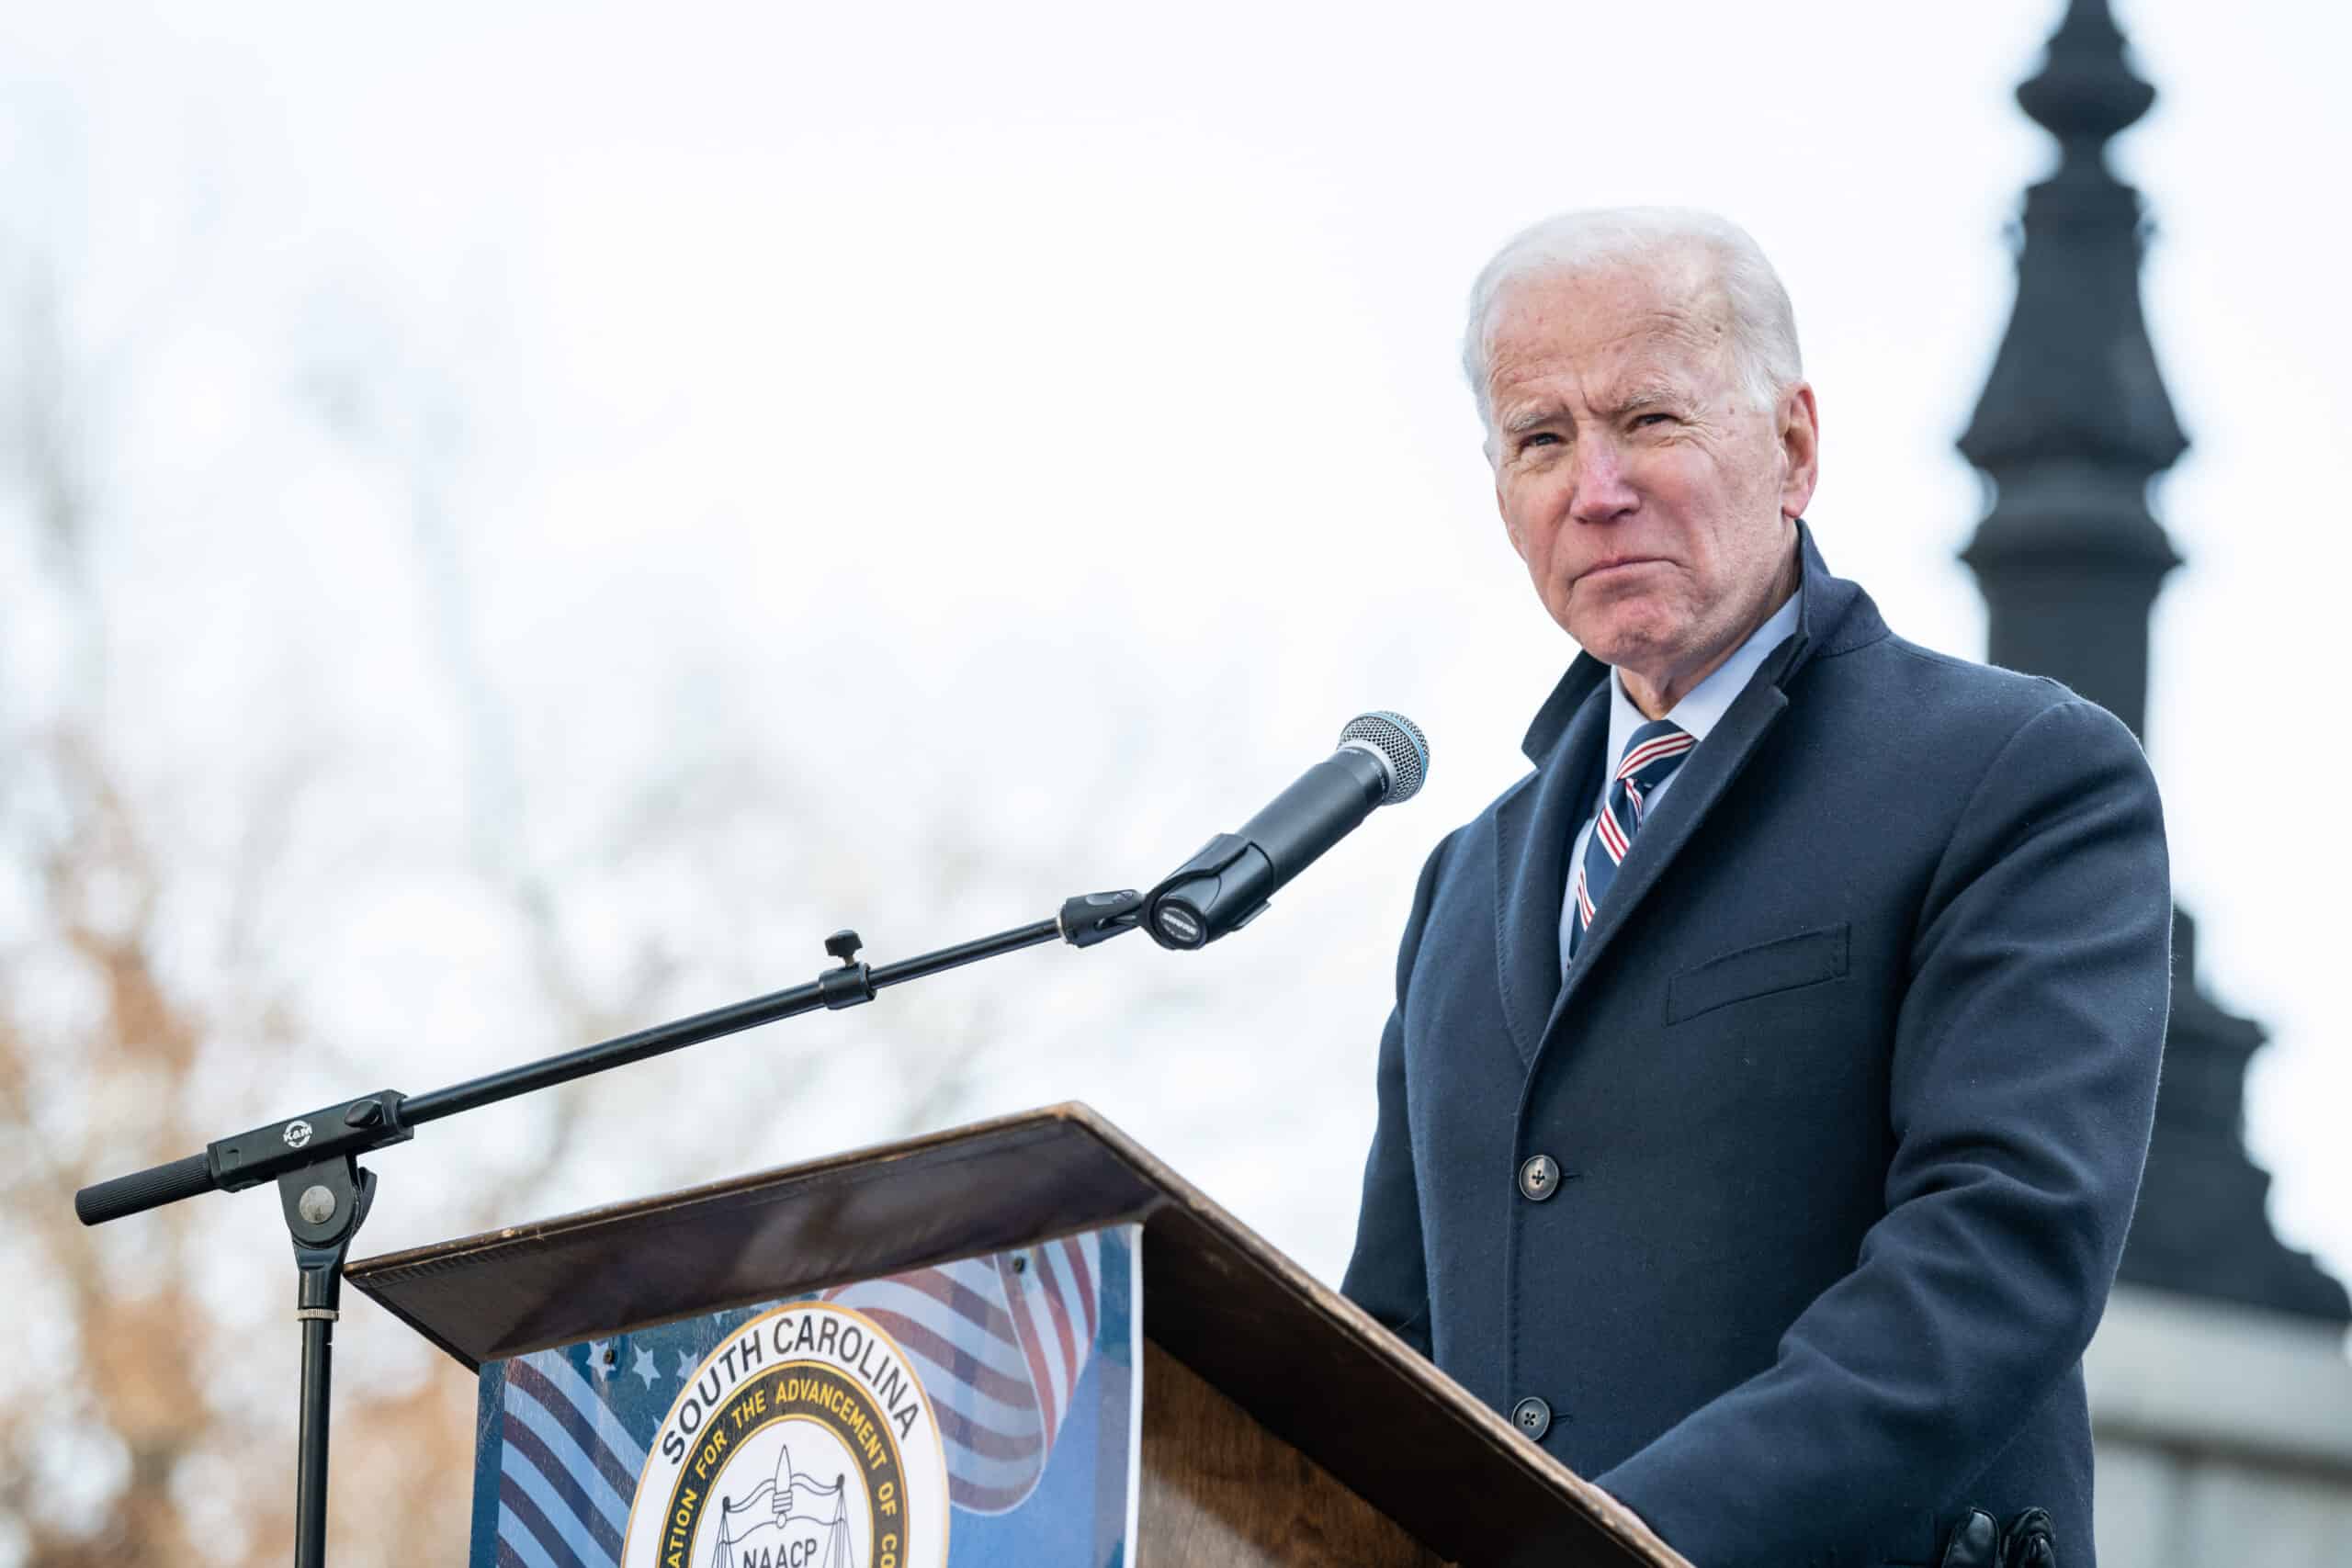 President Biden should urge passage of the For the People Act in his first State of the Union